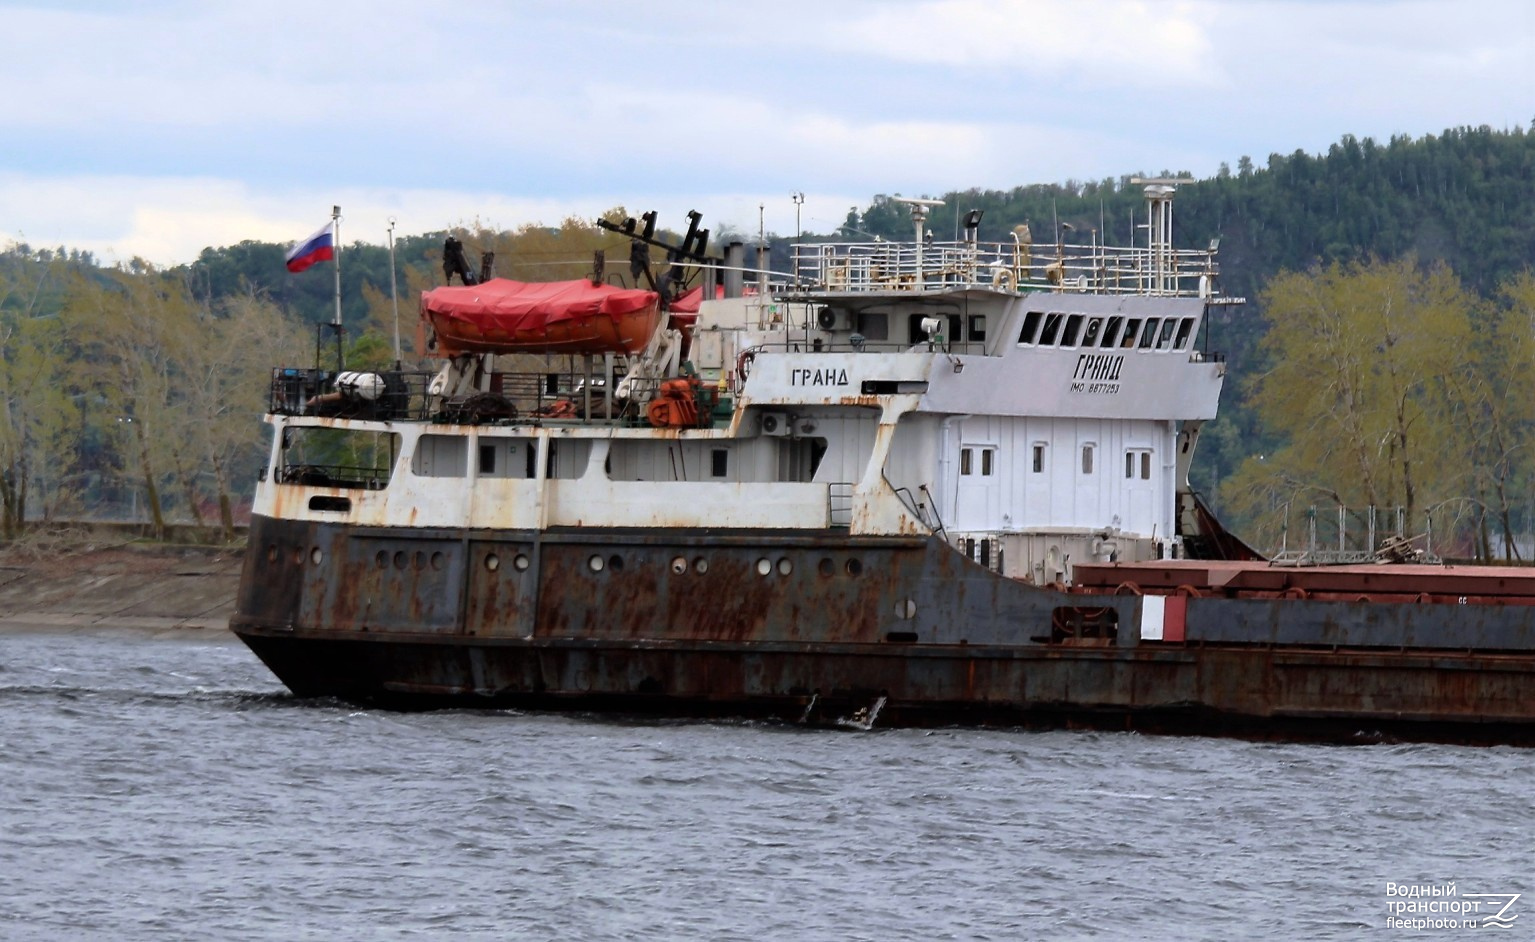 Гранд. Vessel superstructures